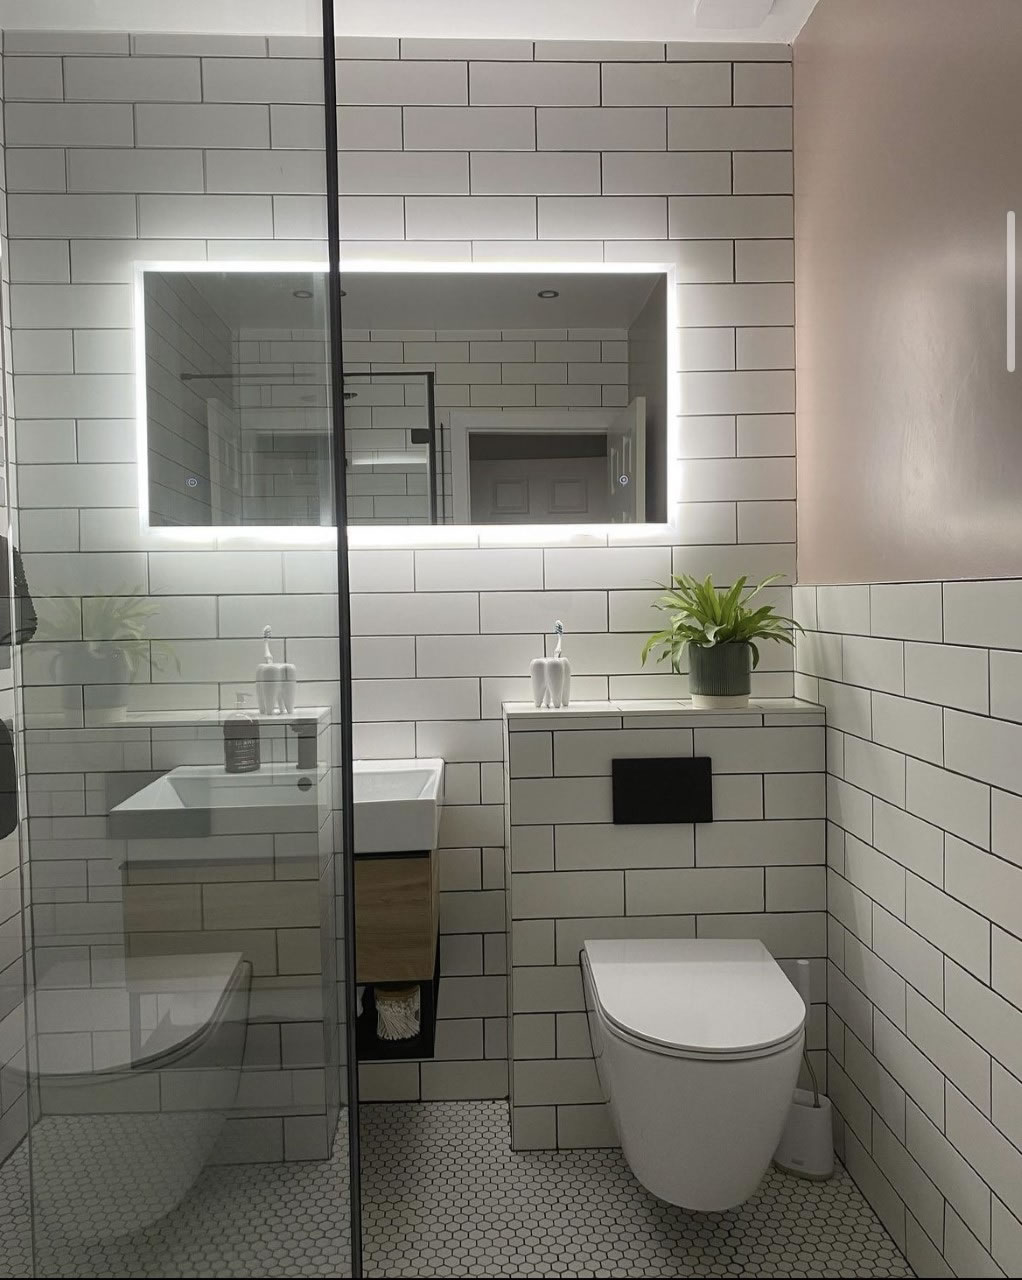 Completed bathroom projects by HPP